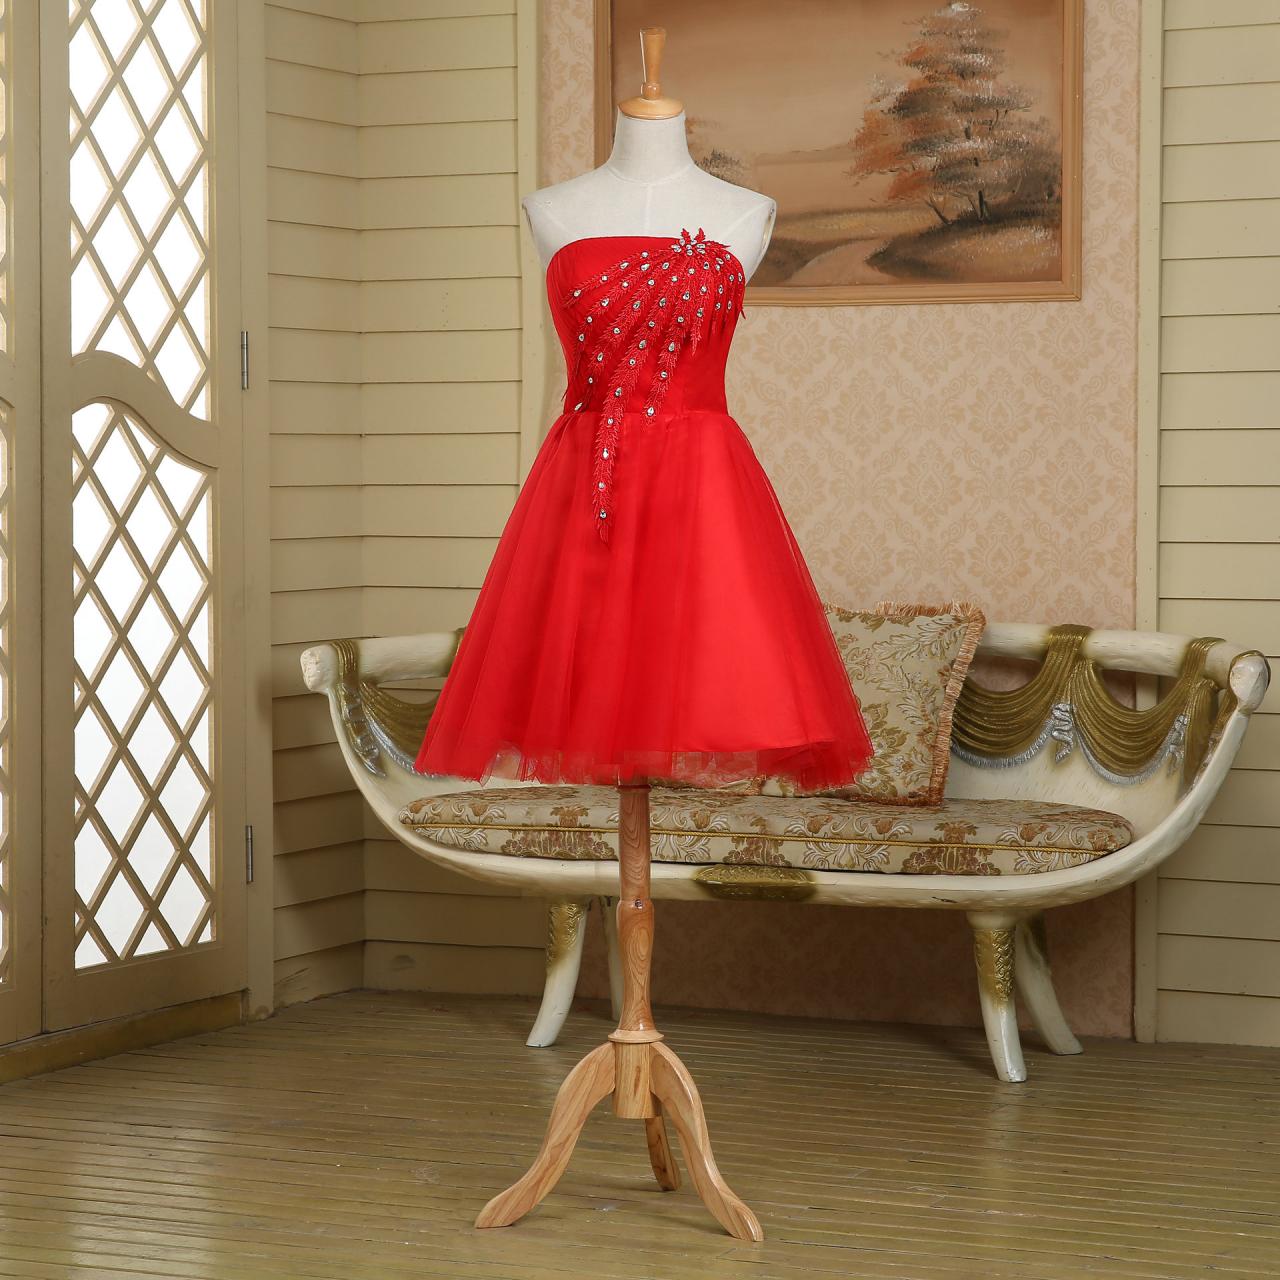 Strapless Unique Short Red Peacock Prom Dress,evening Dress,homecoming Dress,party Dress,bridesmaid Dress Wedding,club,cocktail Dress,birthday